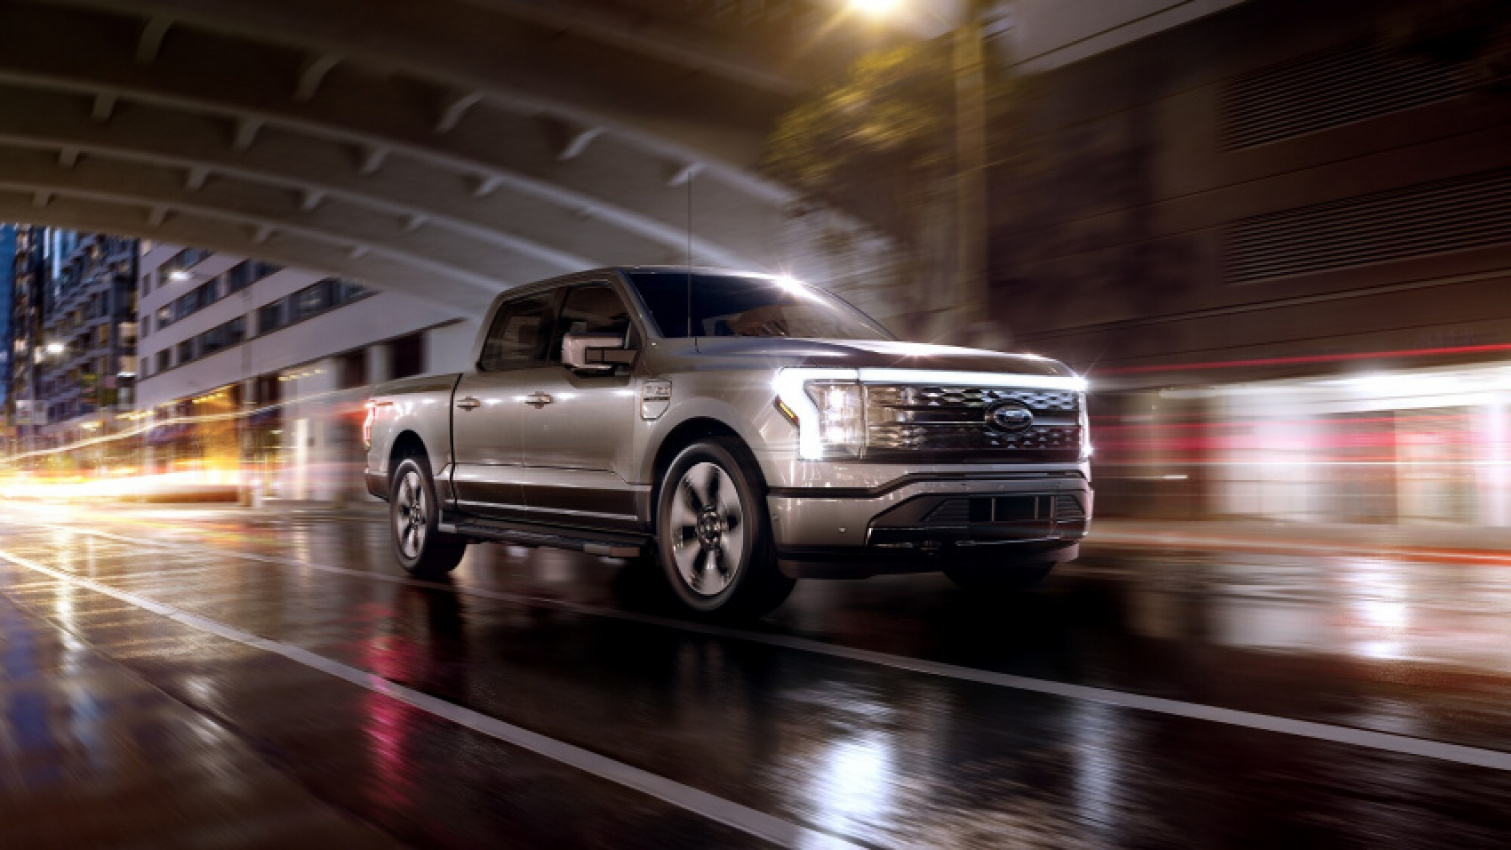 ford, news, tesla, car tech, cars, cybertruck, ford f-150, tesla cybertruck vs. ford f-150 lightning: which electric truck will win?